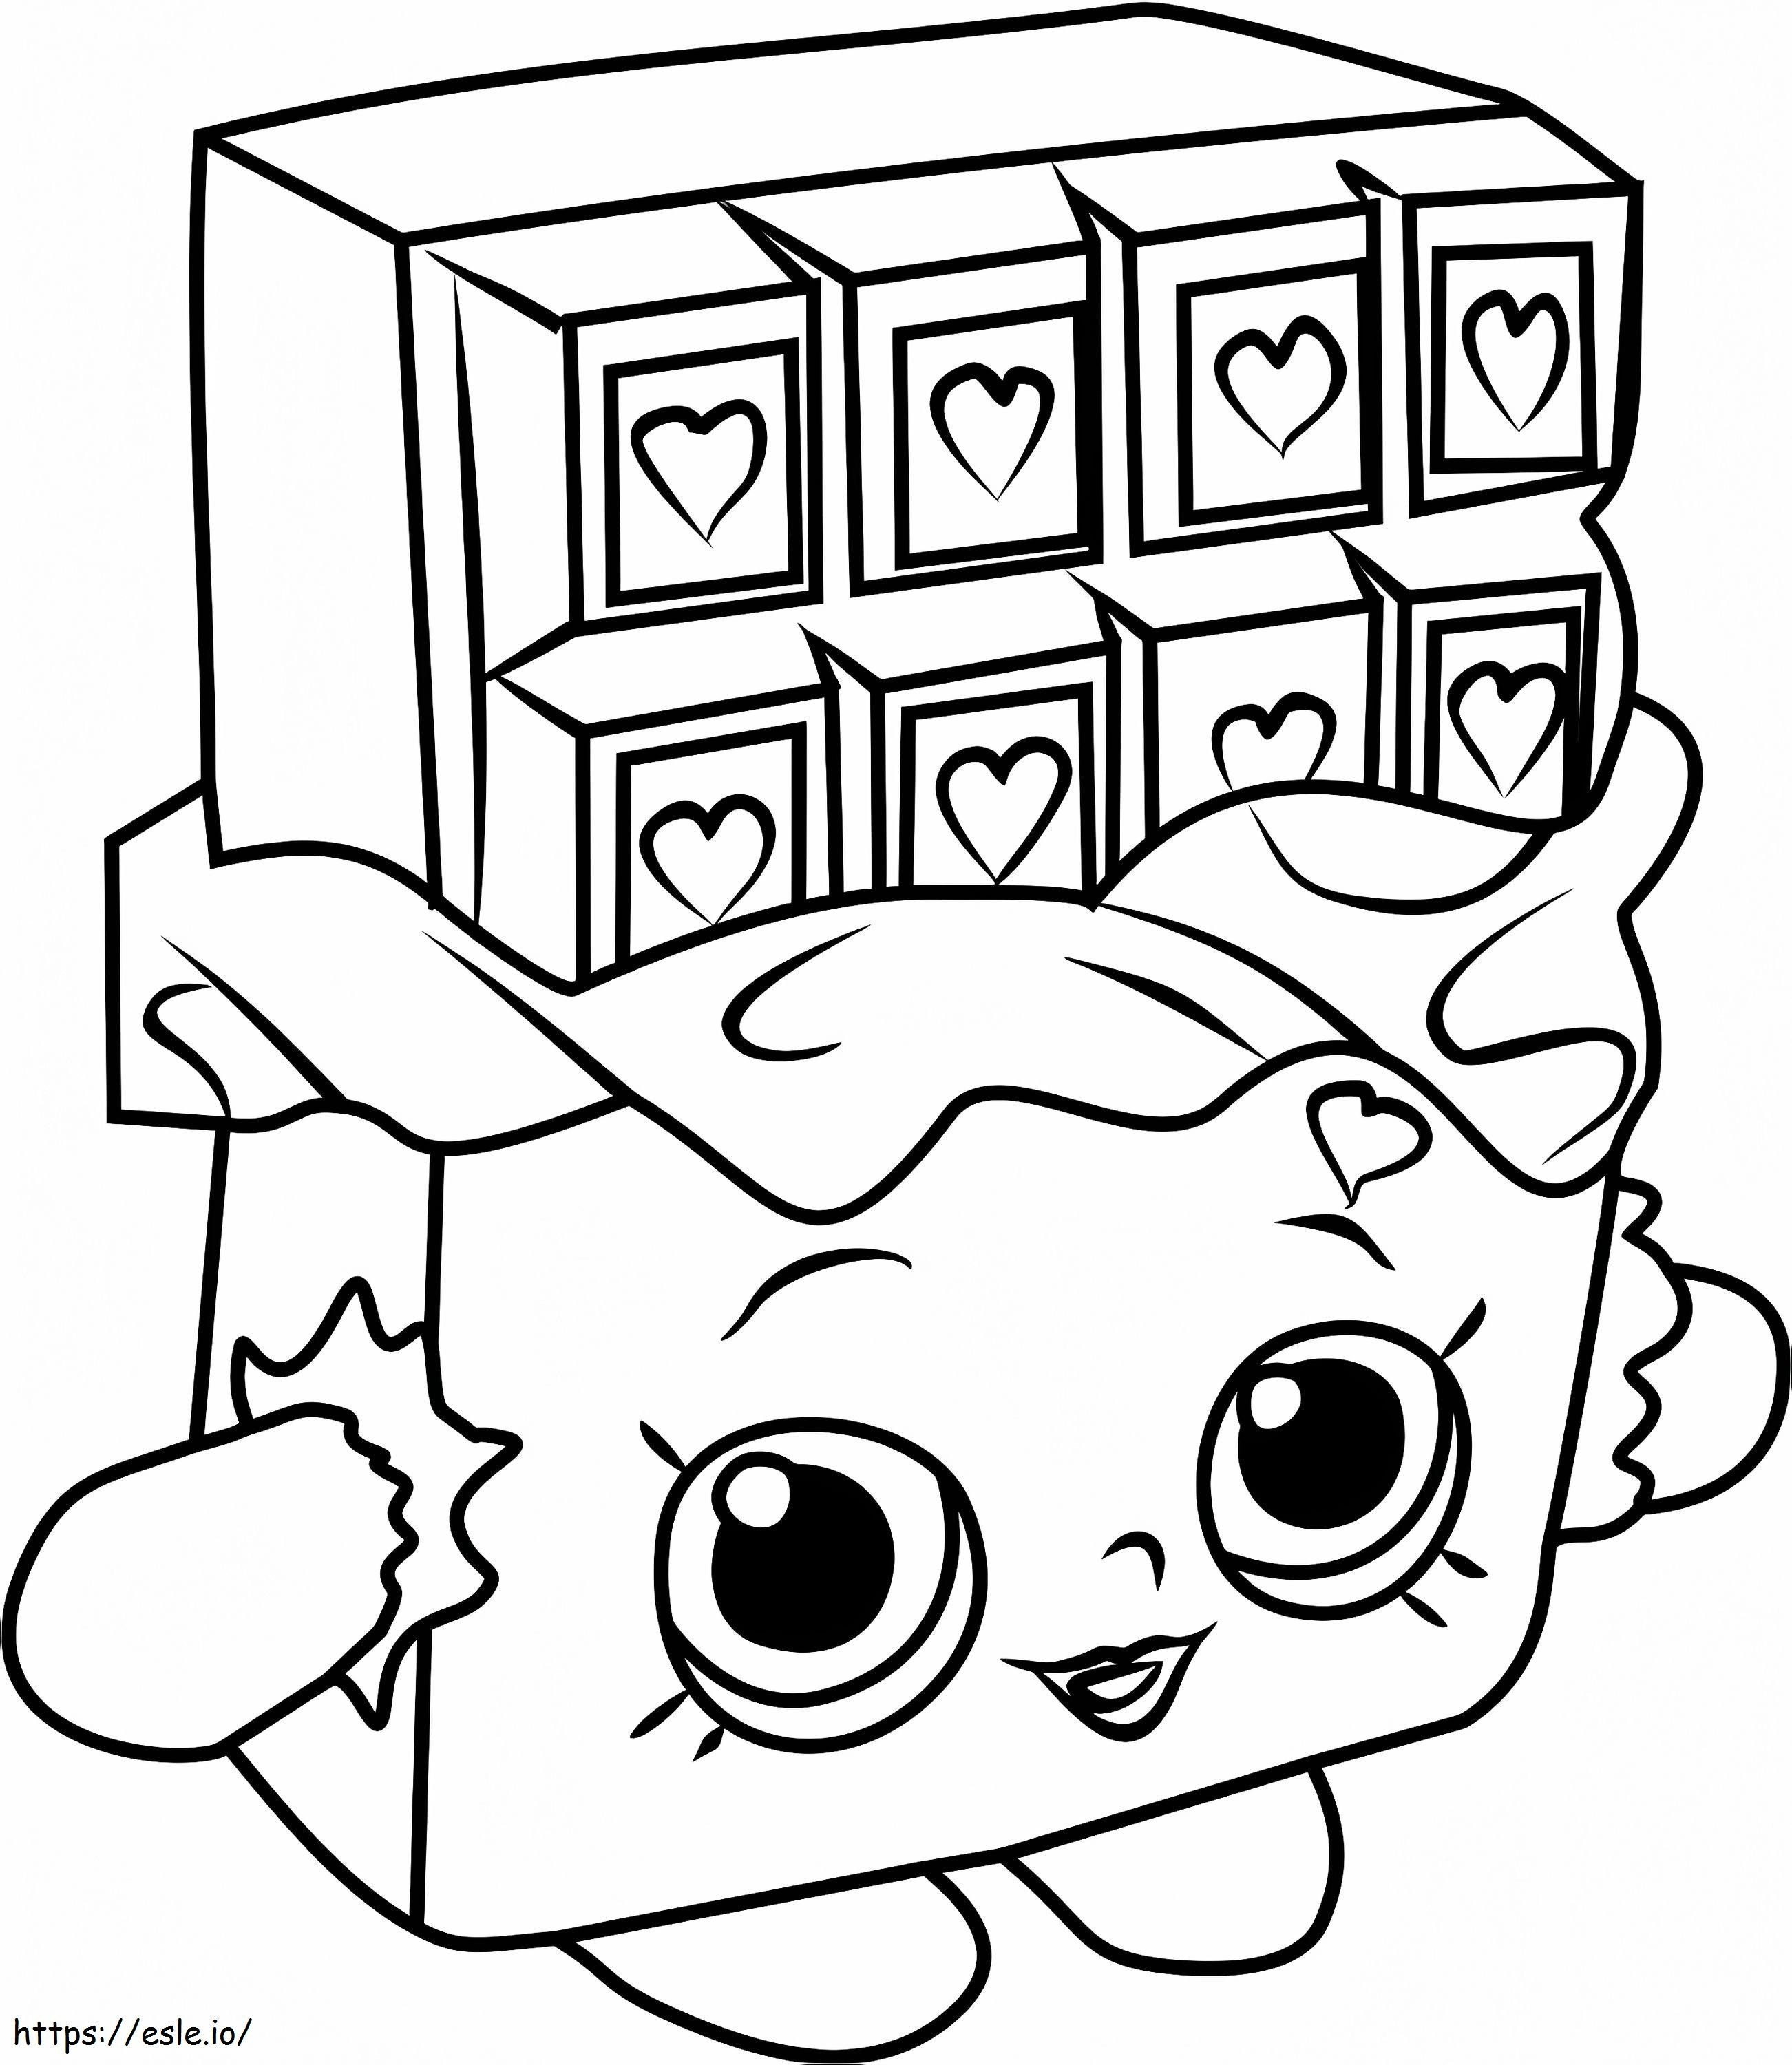 1531186677 Cute Chocolate Shopkins A4 coloring page